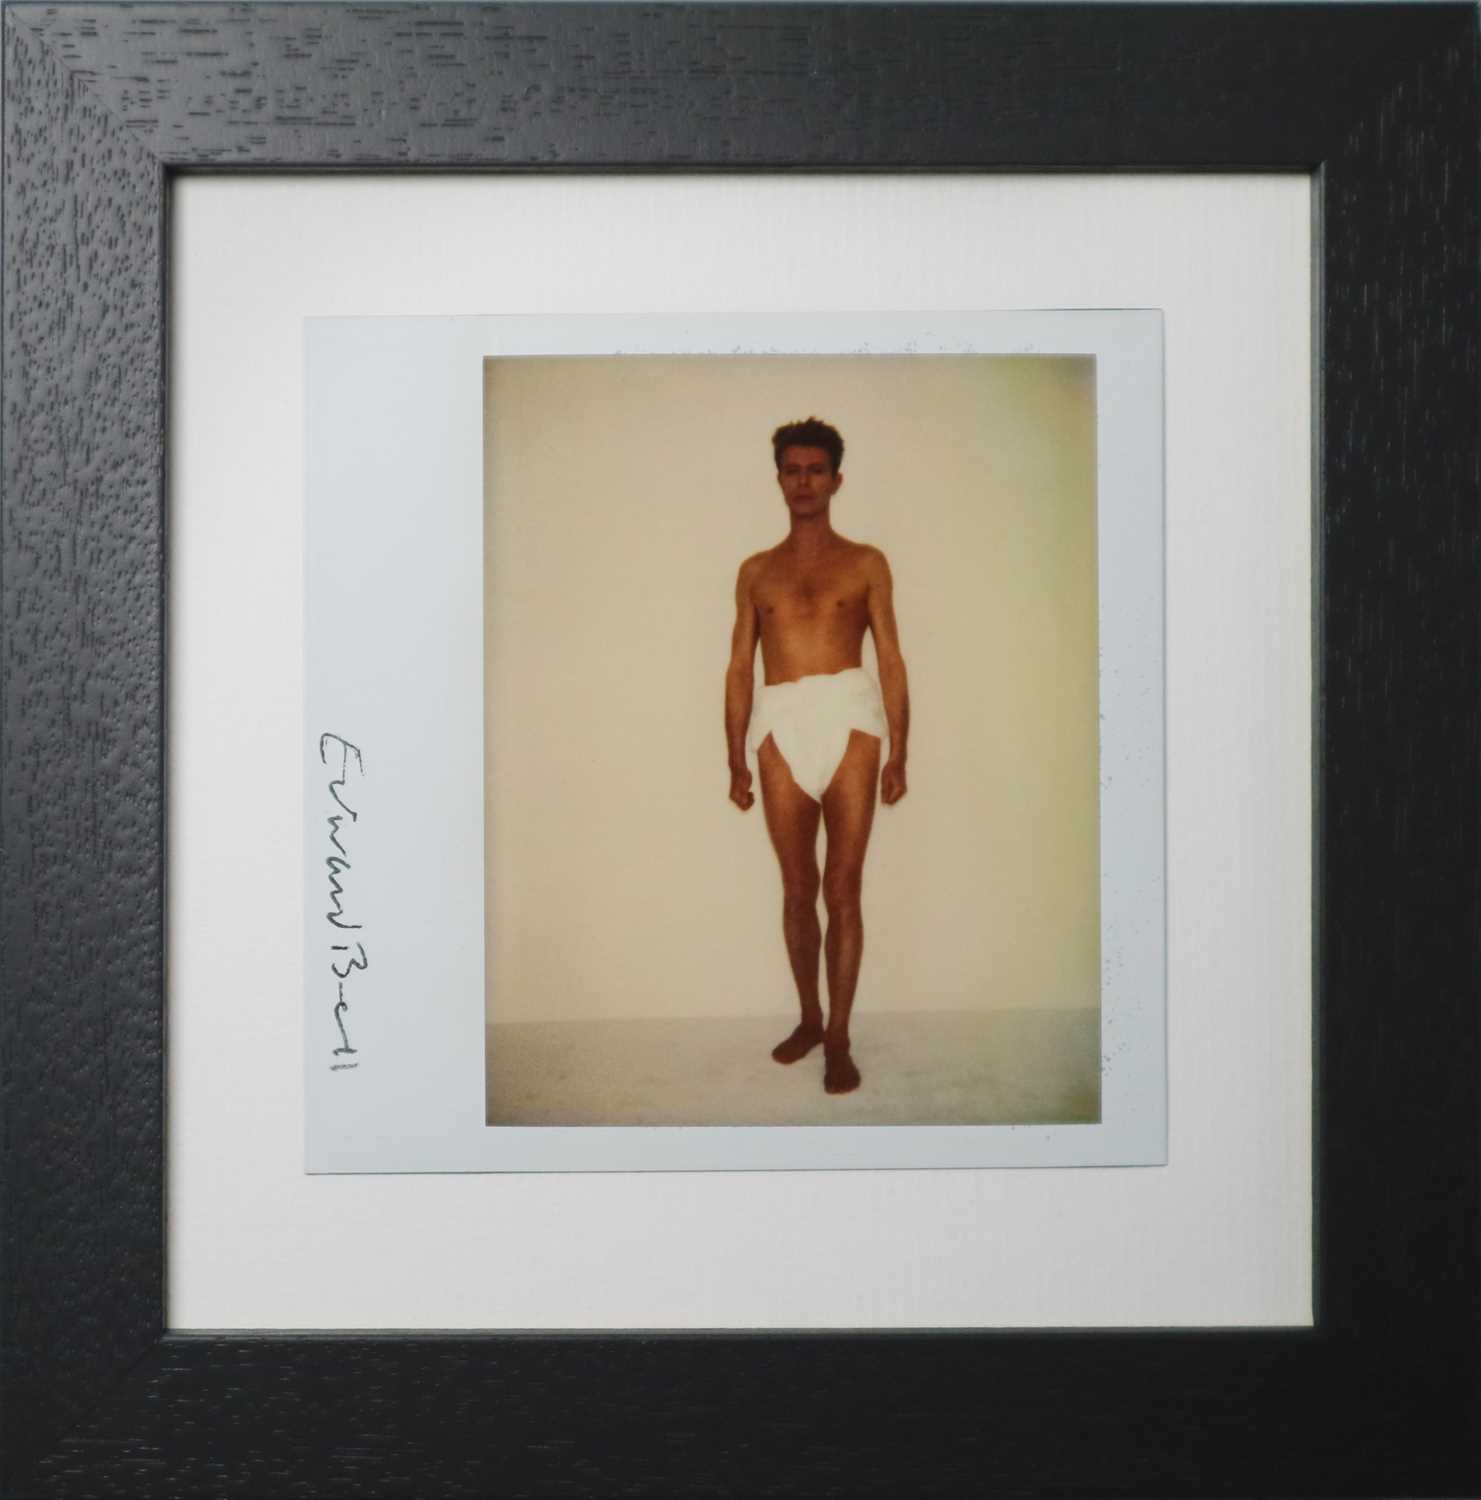 Lot 46 - Edward Bell (British Contemporary) Polaroid David Bowie in Toga